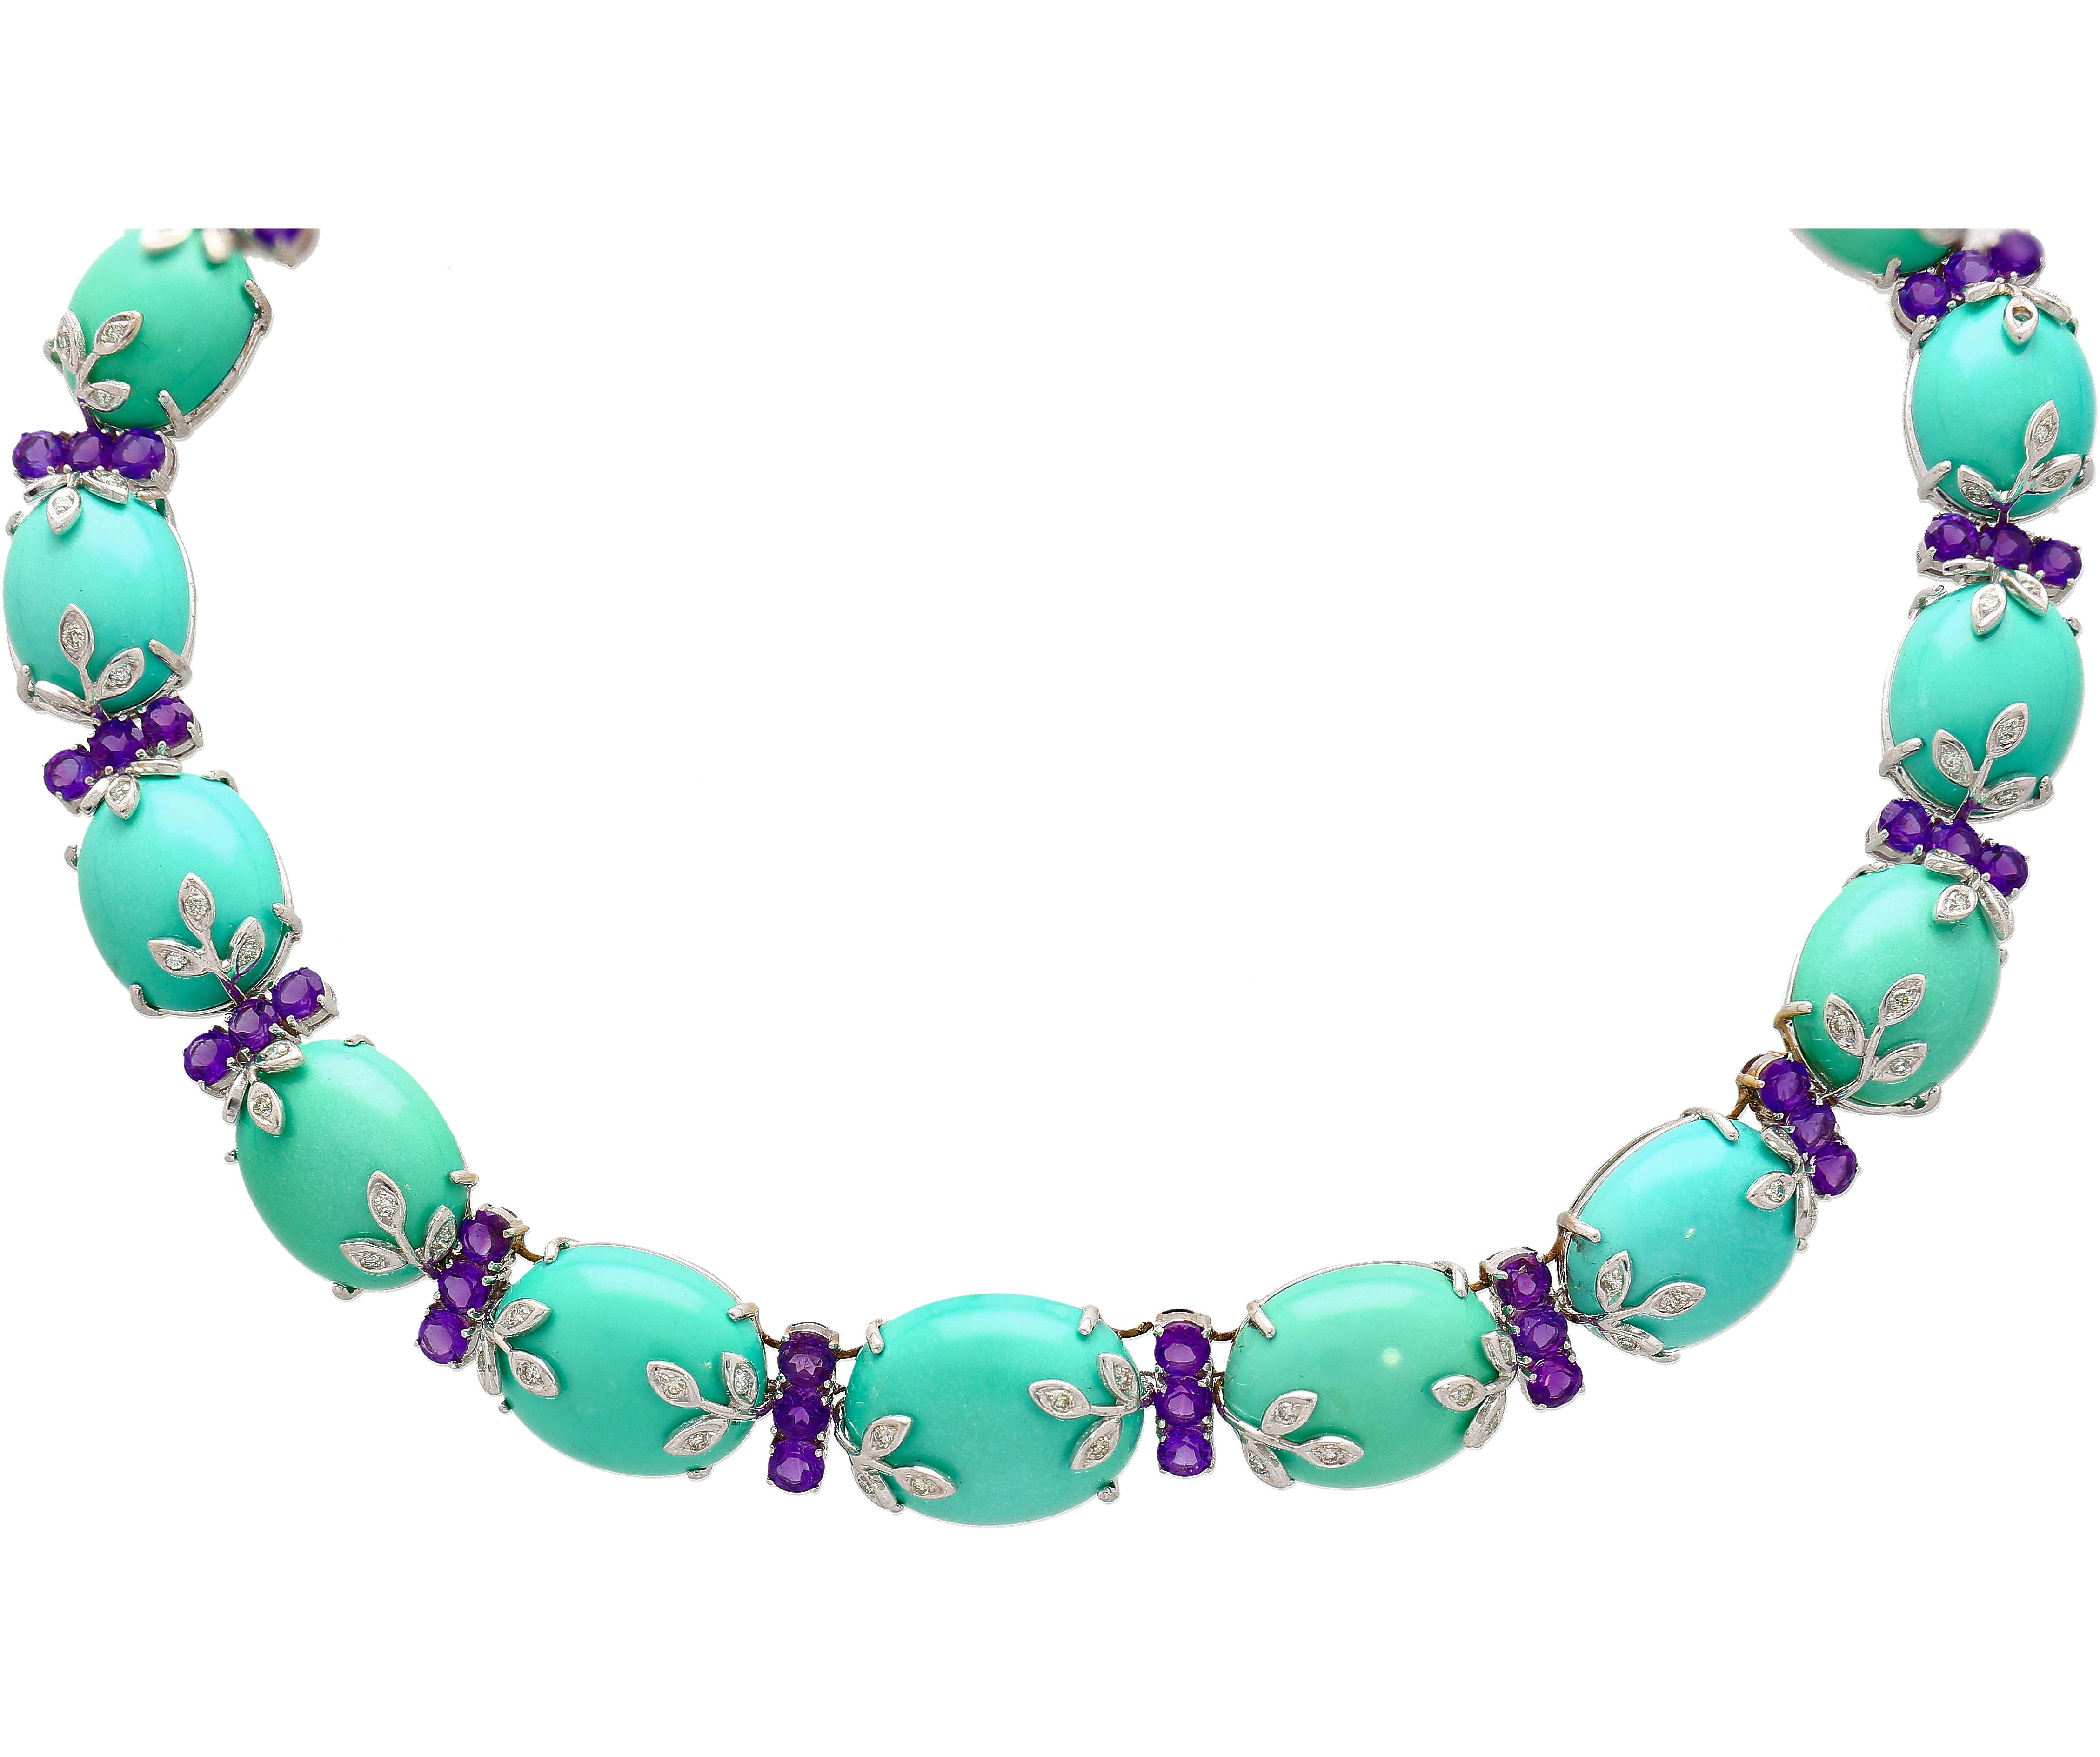 18K White Gold Turquoise and Amethyst Choker Necklace For Sale 3